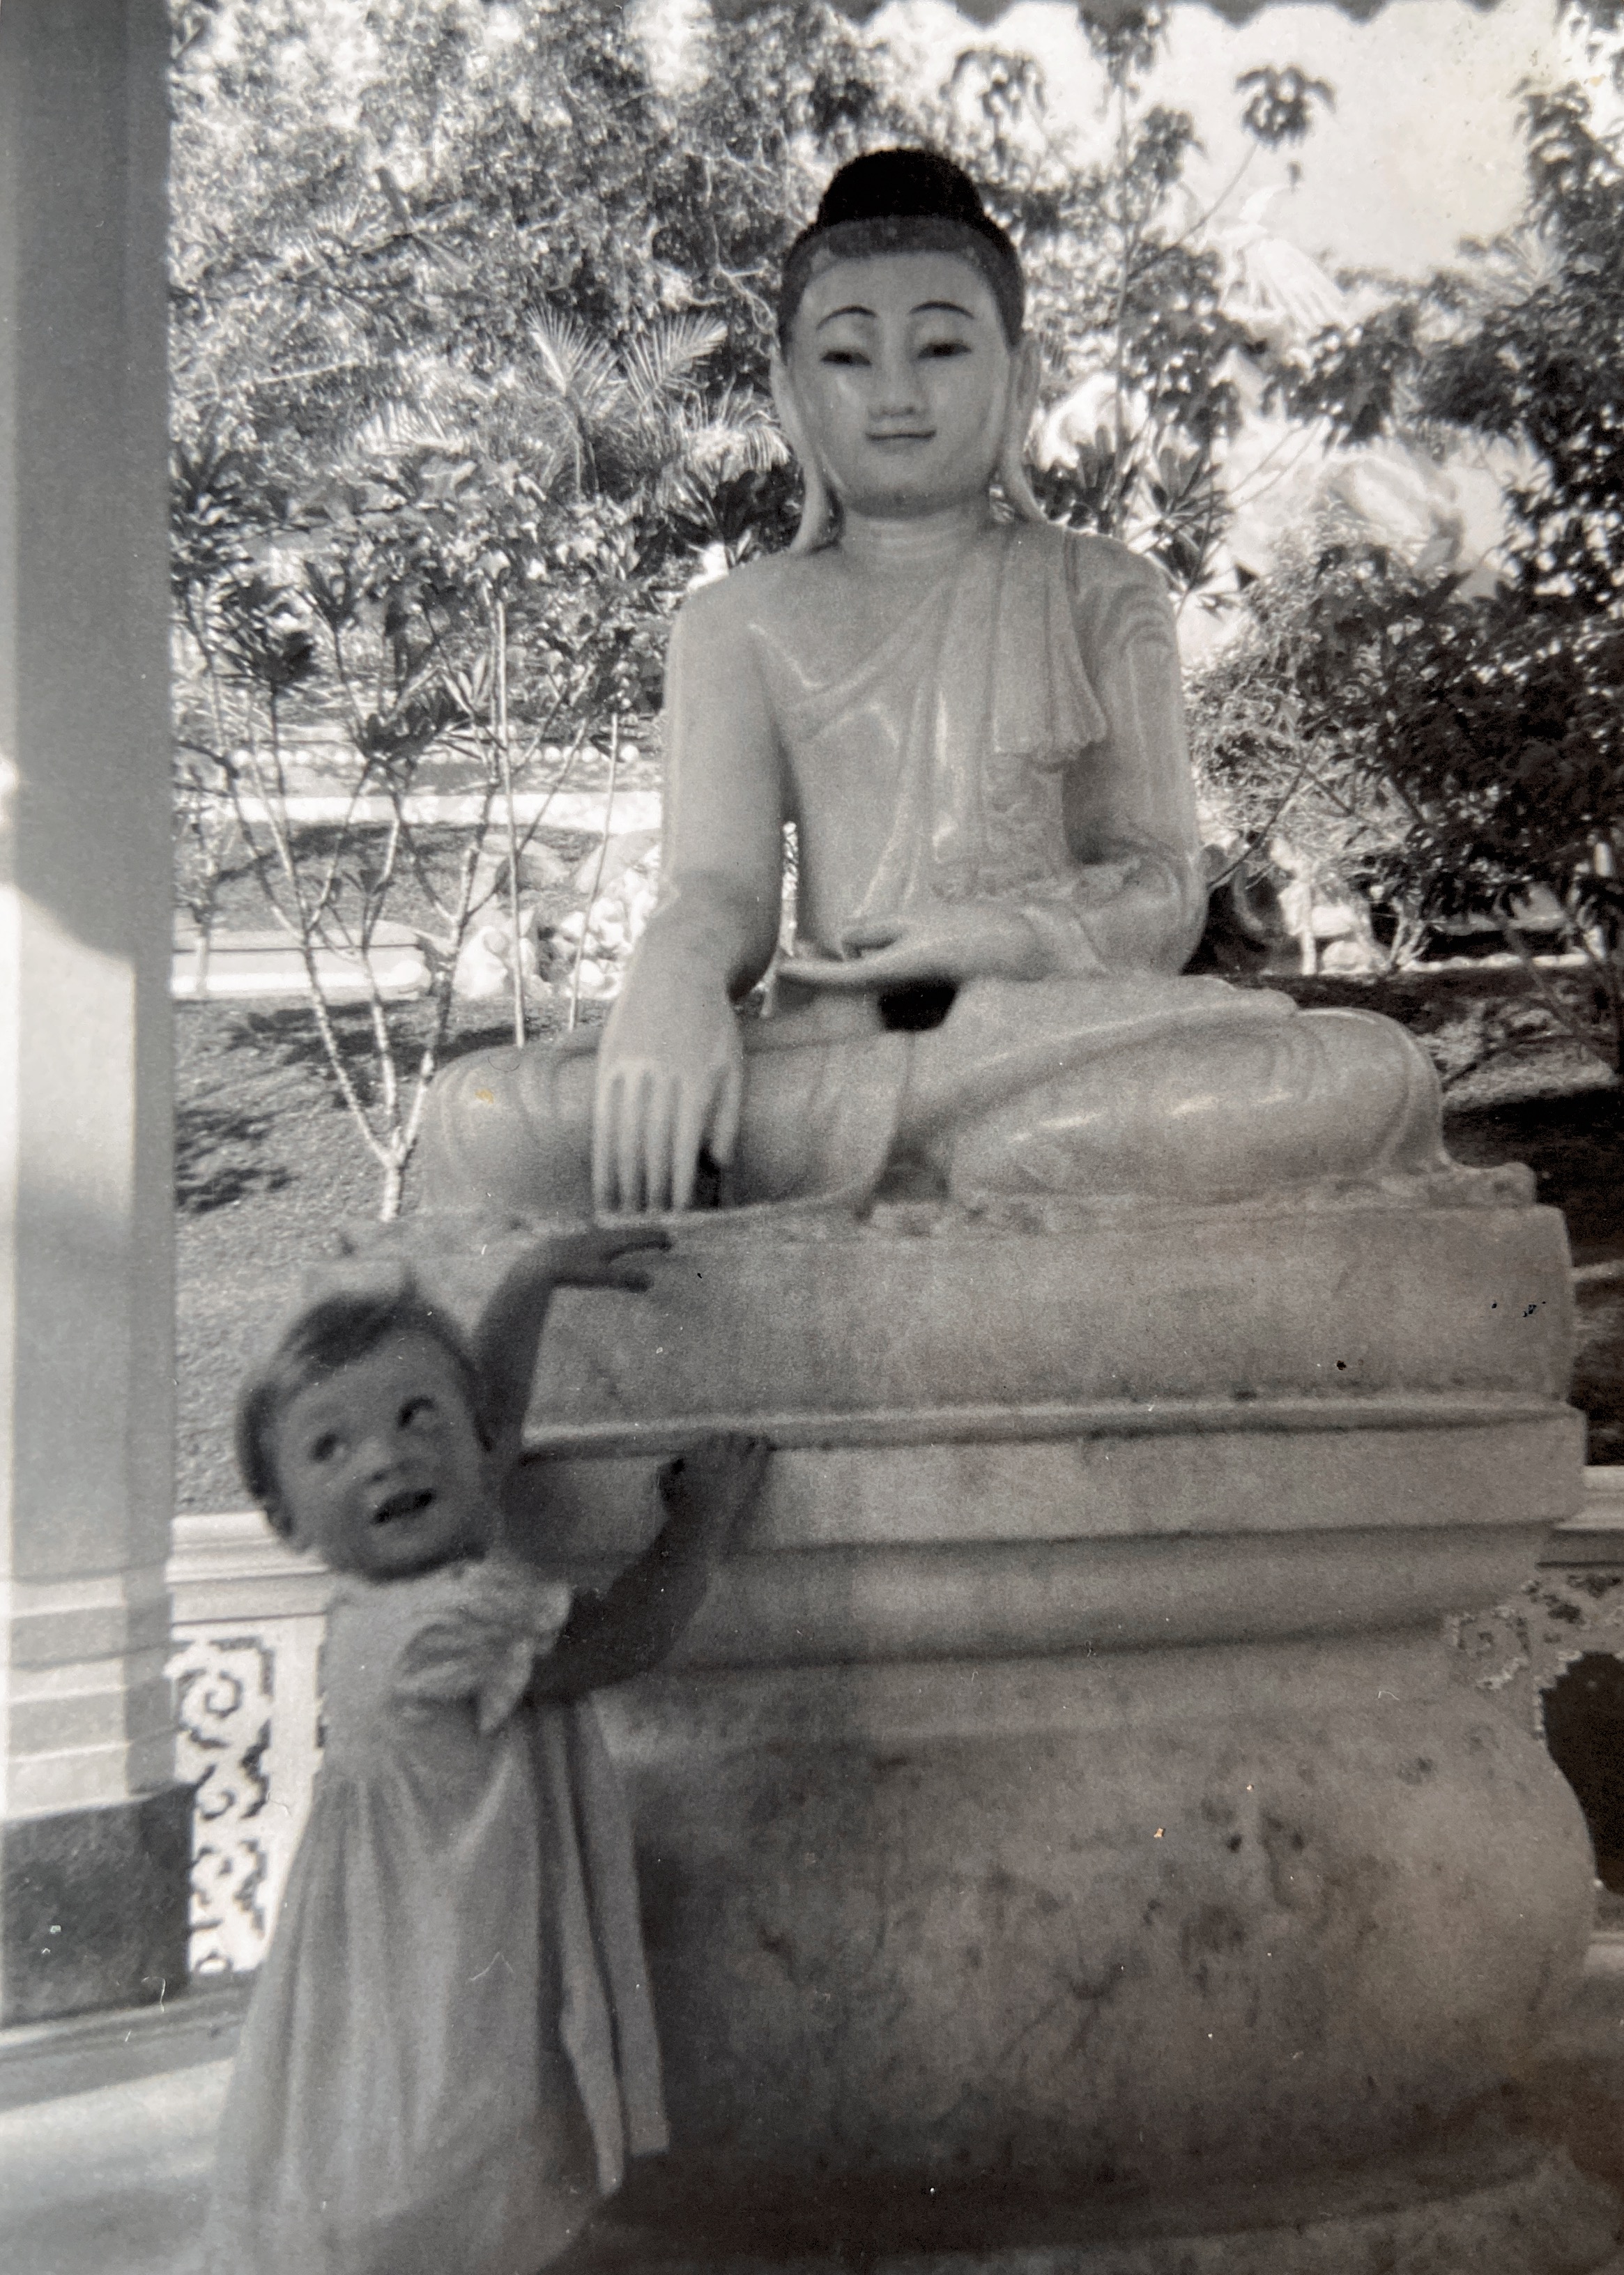 April 1956 At Haw Par Villa. This was made by creators of Tiger Balm. There is also a photo of Christine who went back there in 2022 to see the same place.